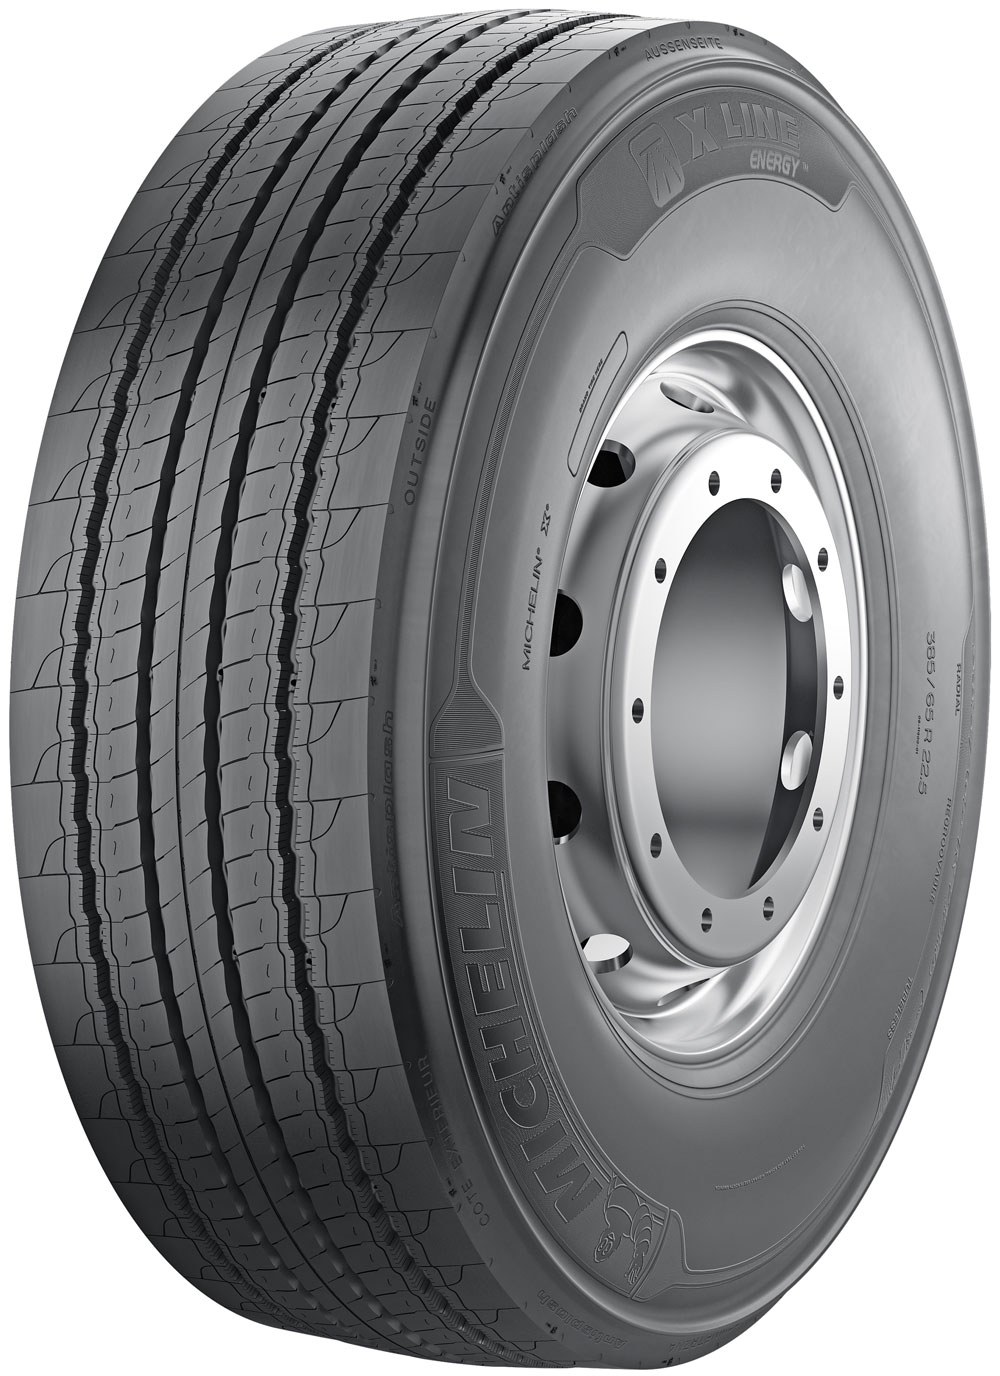 Anvelope camion MICHELIN XLINEF 385/55 R22.5 160K